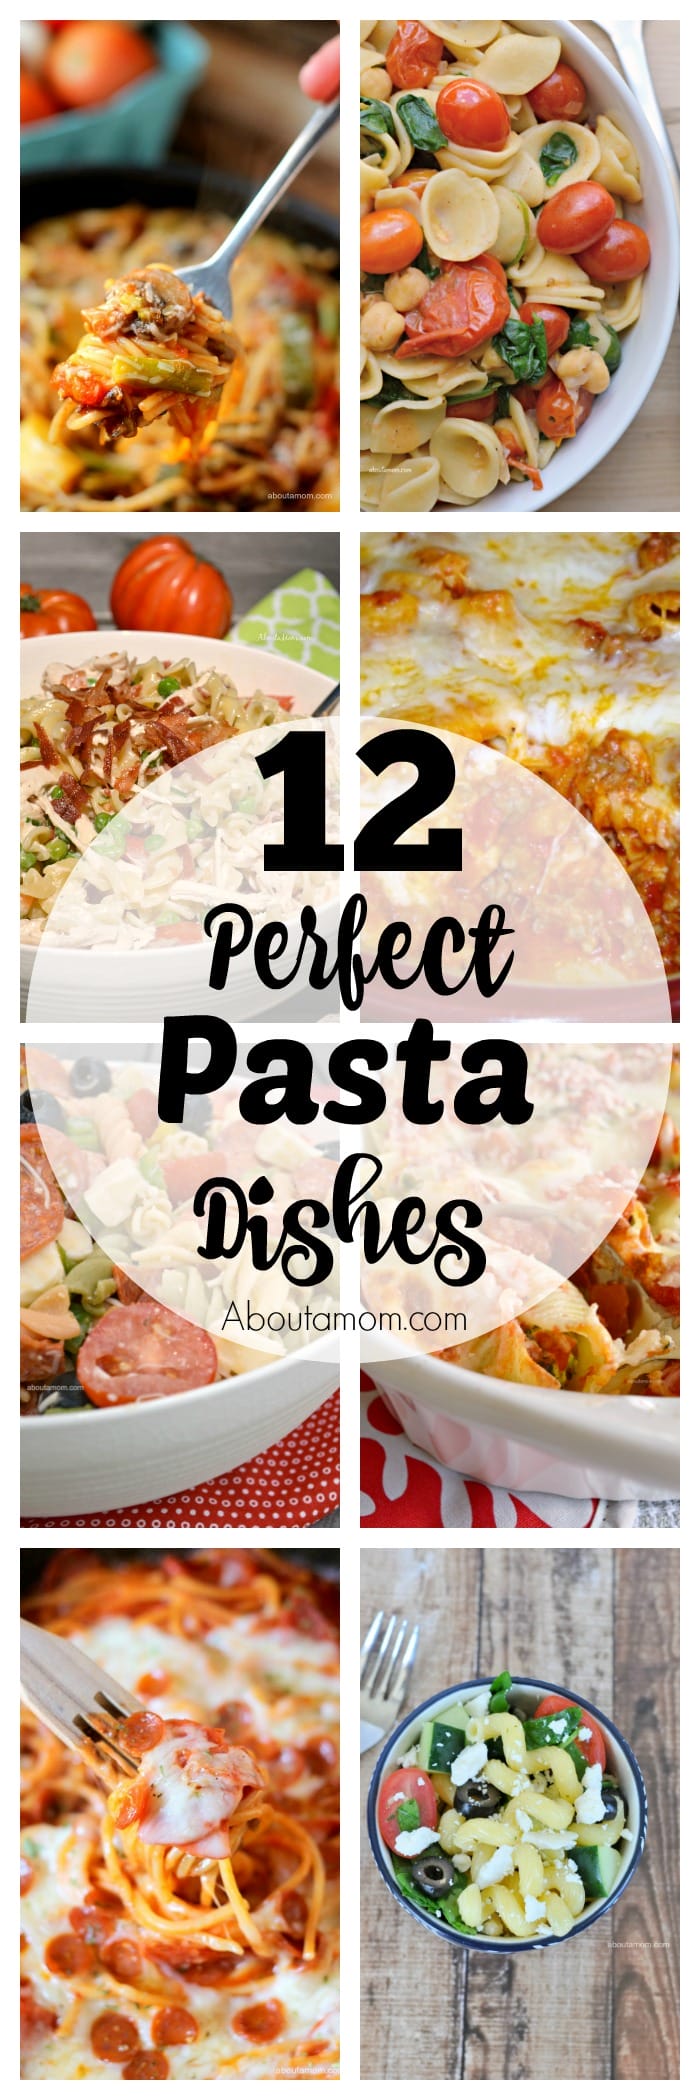 Pasta is the ultimate comfort food. This collection of pasta recipes features a variety of mouthwatering ingredients and sauces.